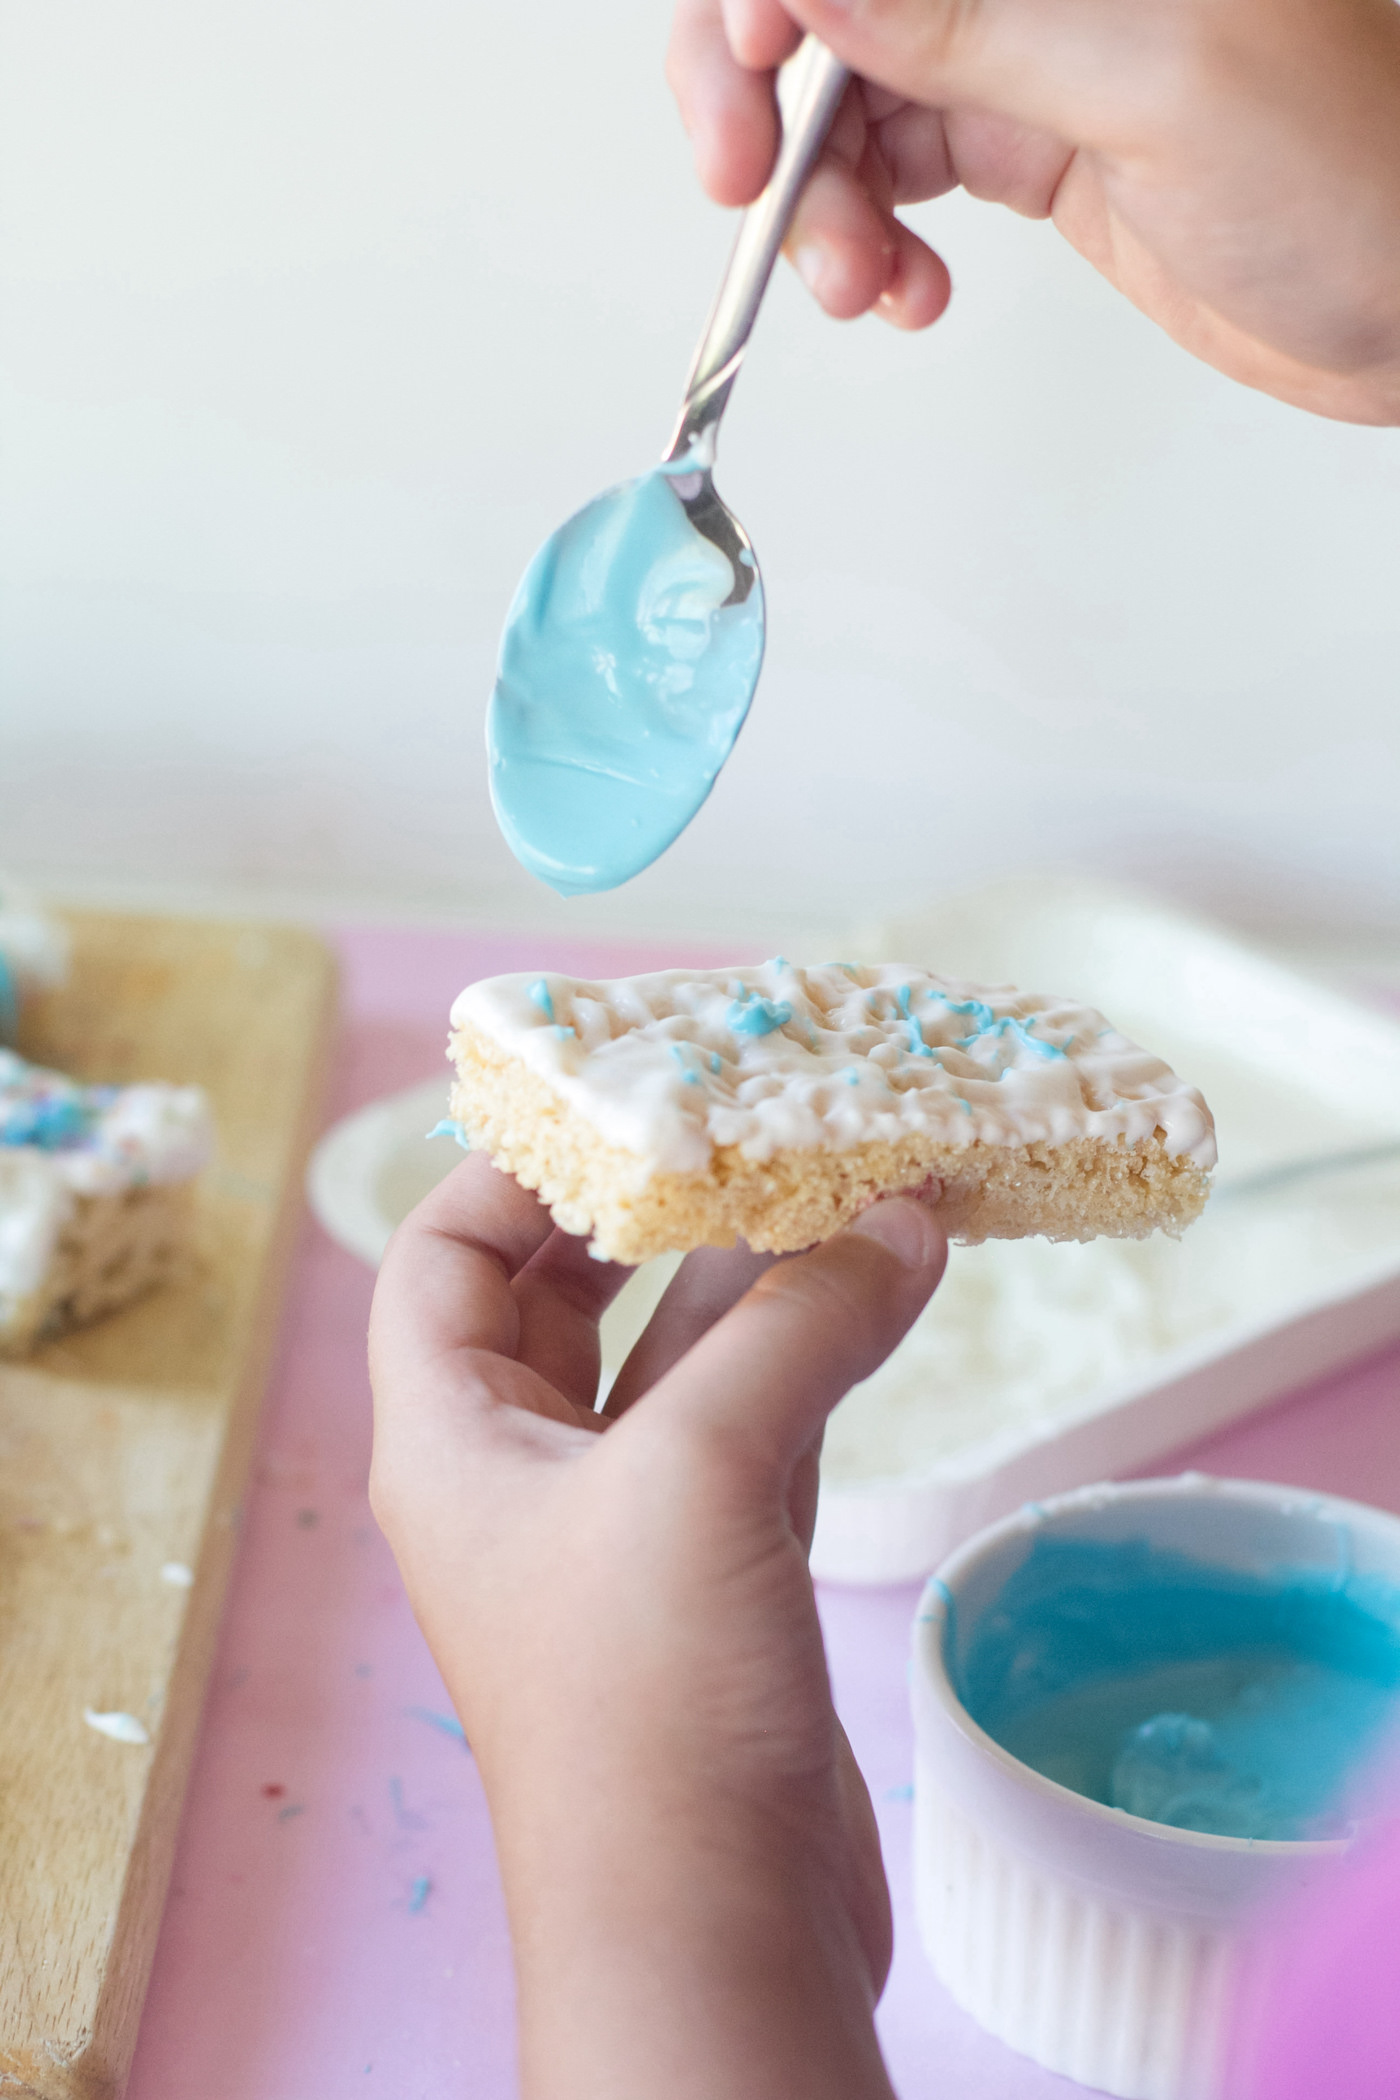 Drizzling candy melts onto the rice krispie bars